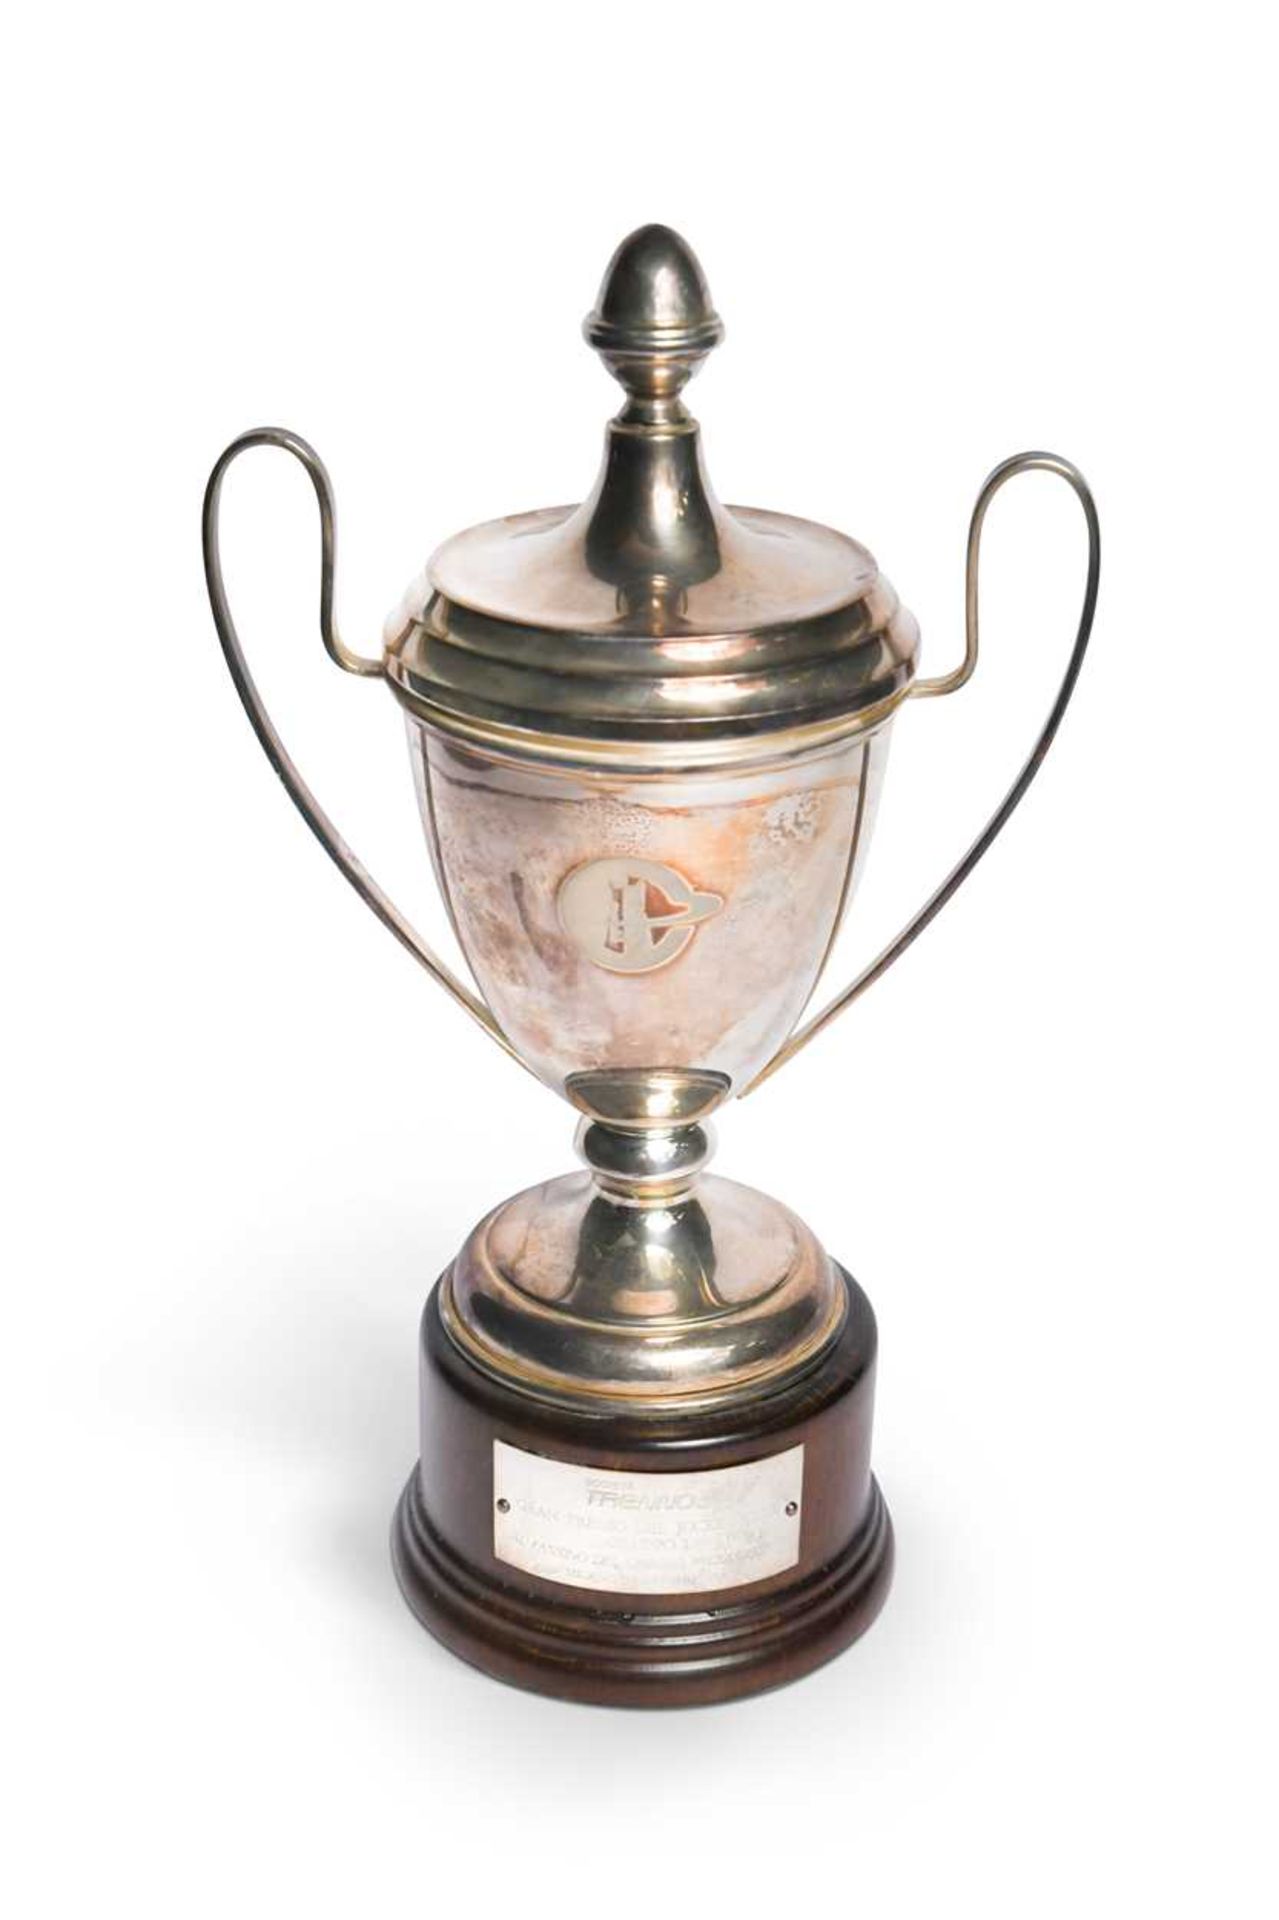 A Trenno S.p.A Gren Premio del Jockey Club silver trophy cup and stand, awarded to Frankie Dettori,